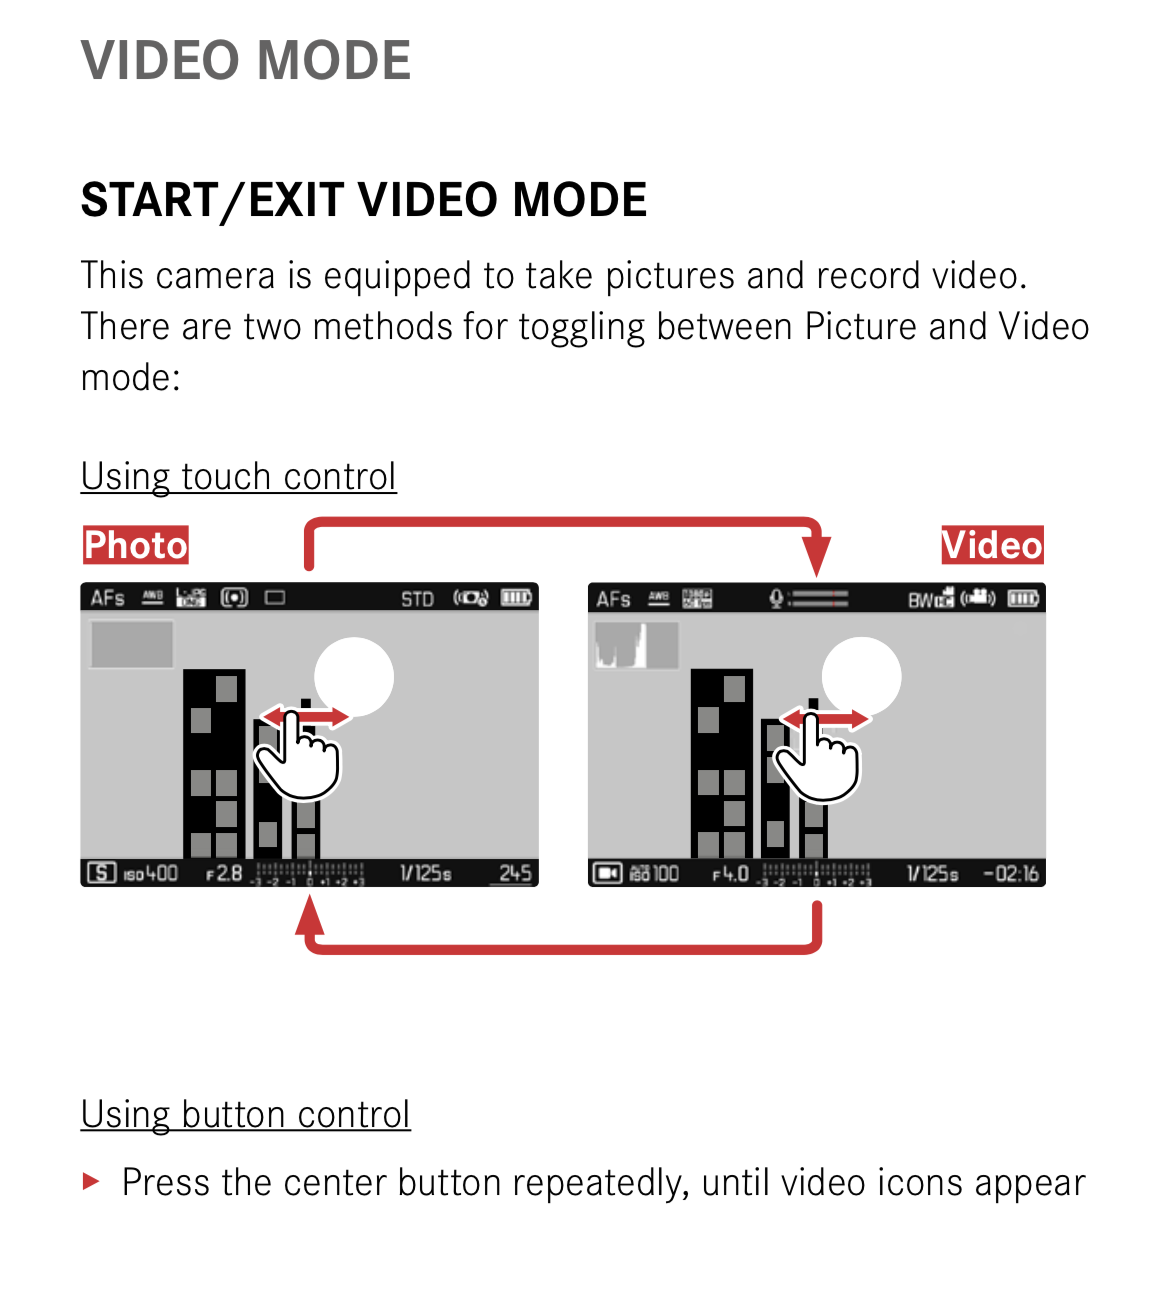 The manual confirms that the only way to start video is by using the display toggle button or by using touch control